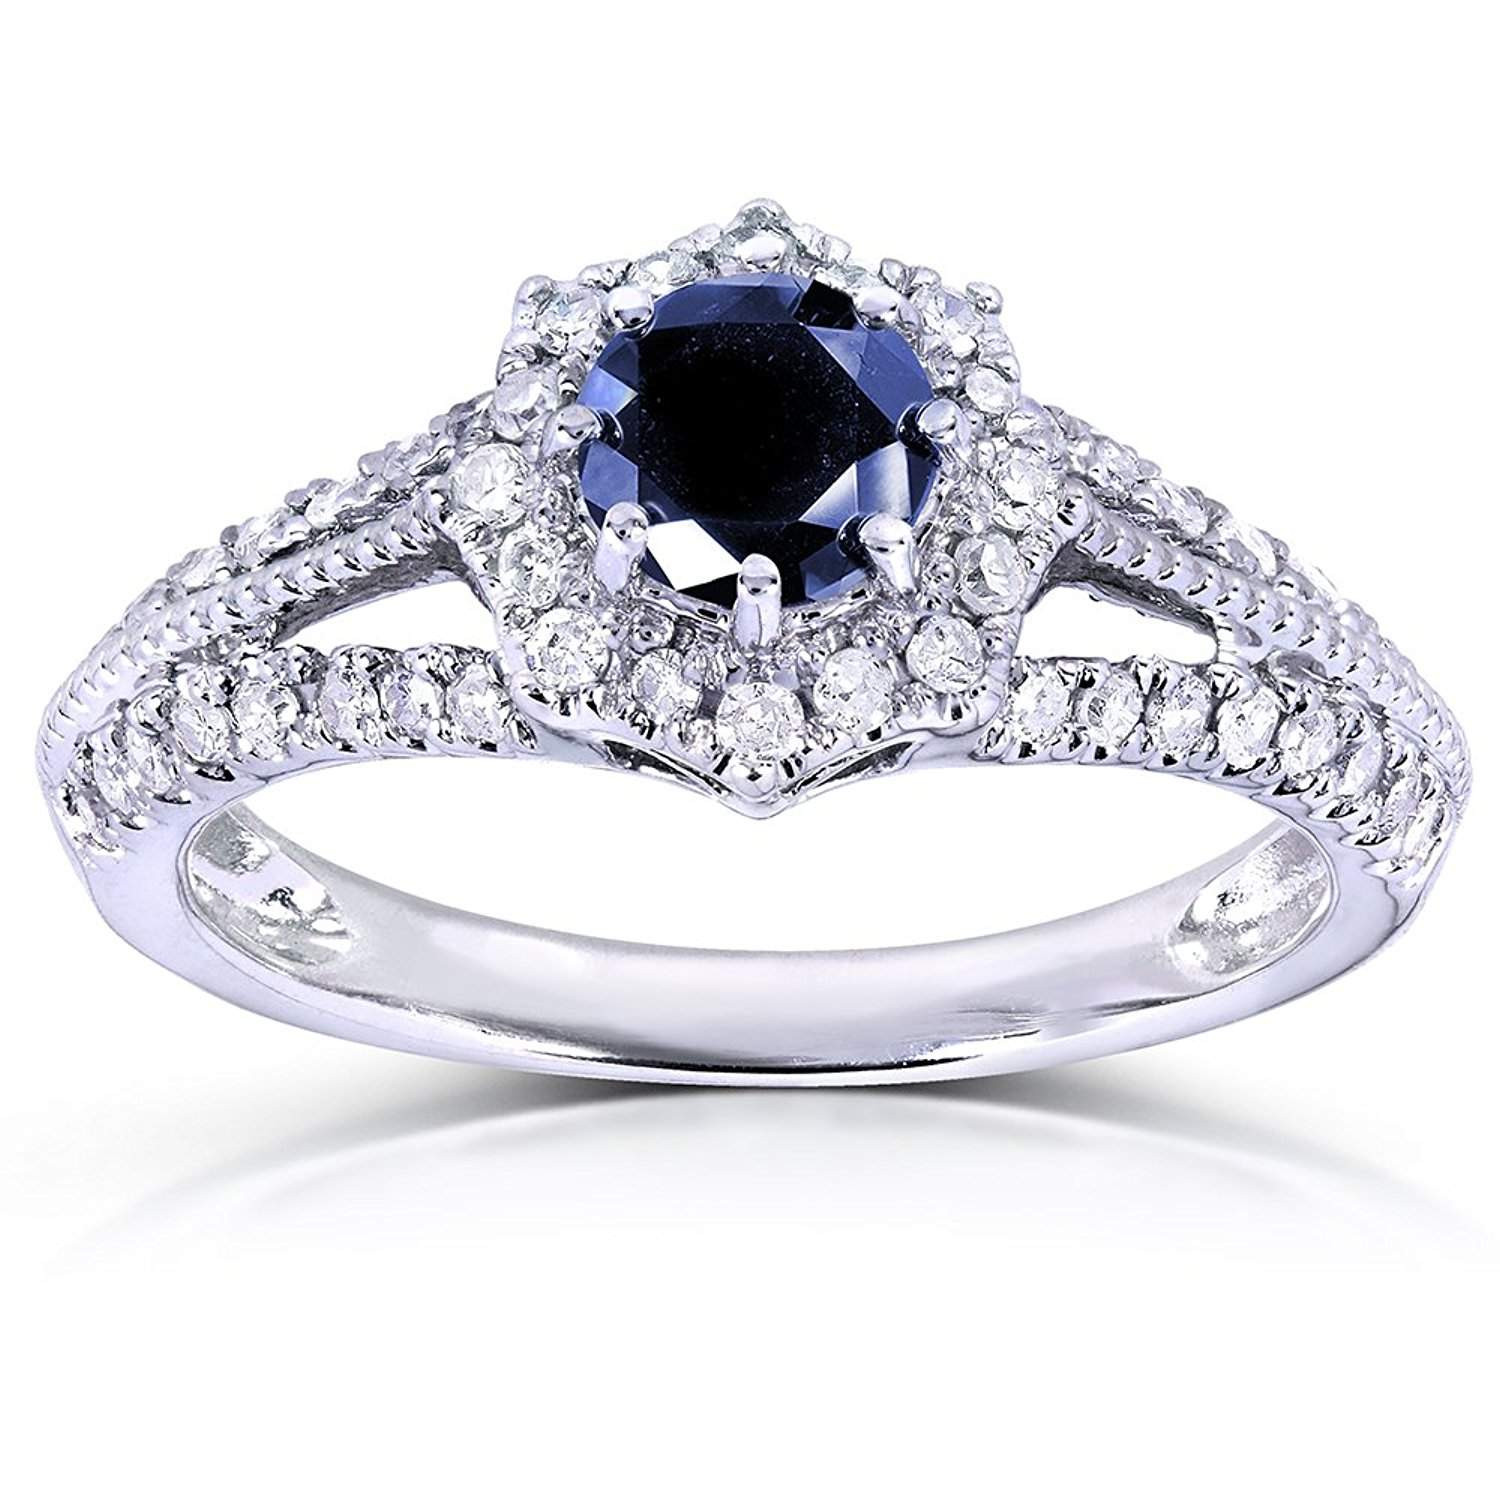 Affordable Diamond Rings
 Top 10 Best Valentine’s Day Deals on Engagement Rings